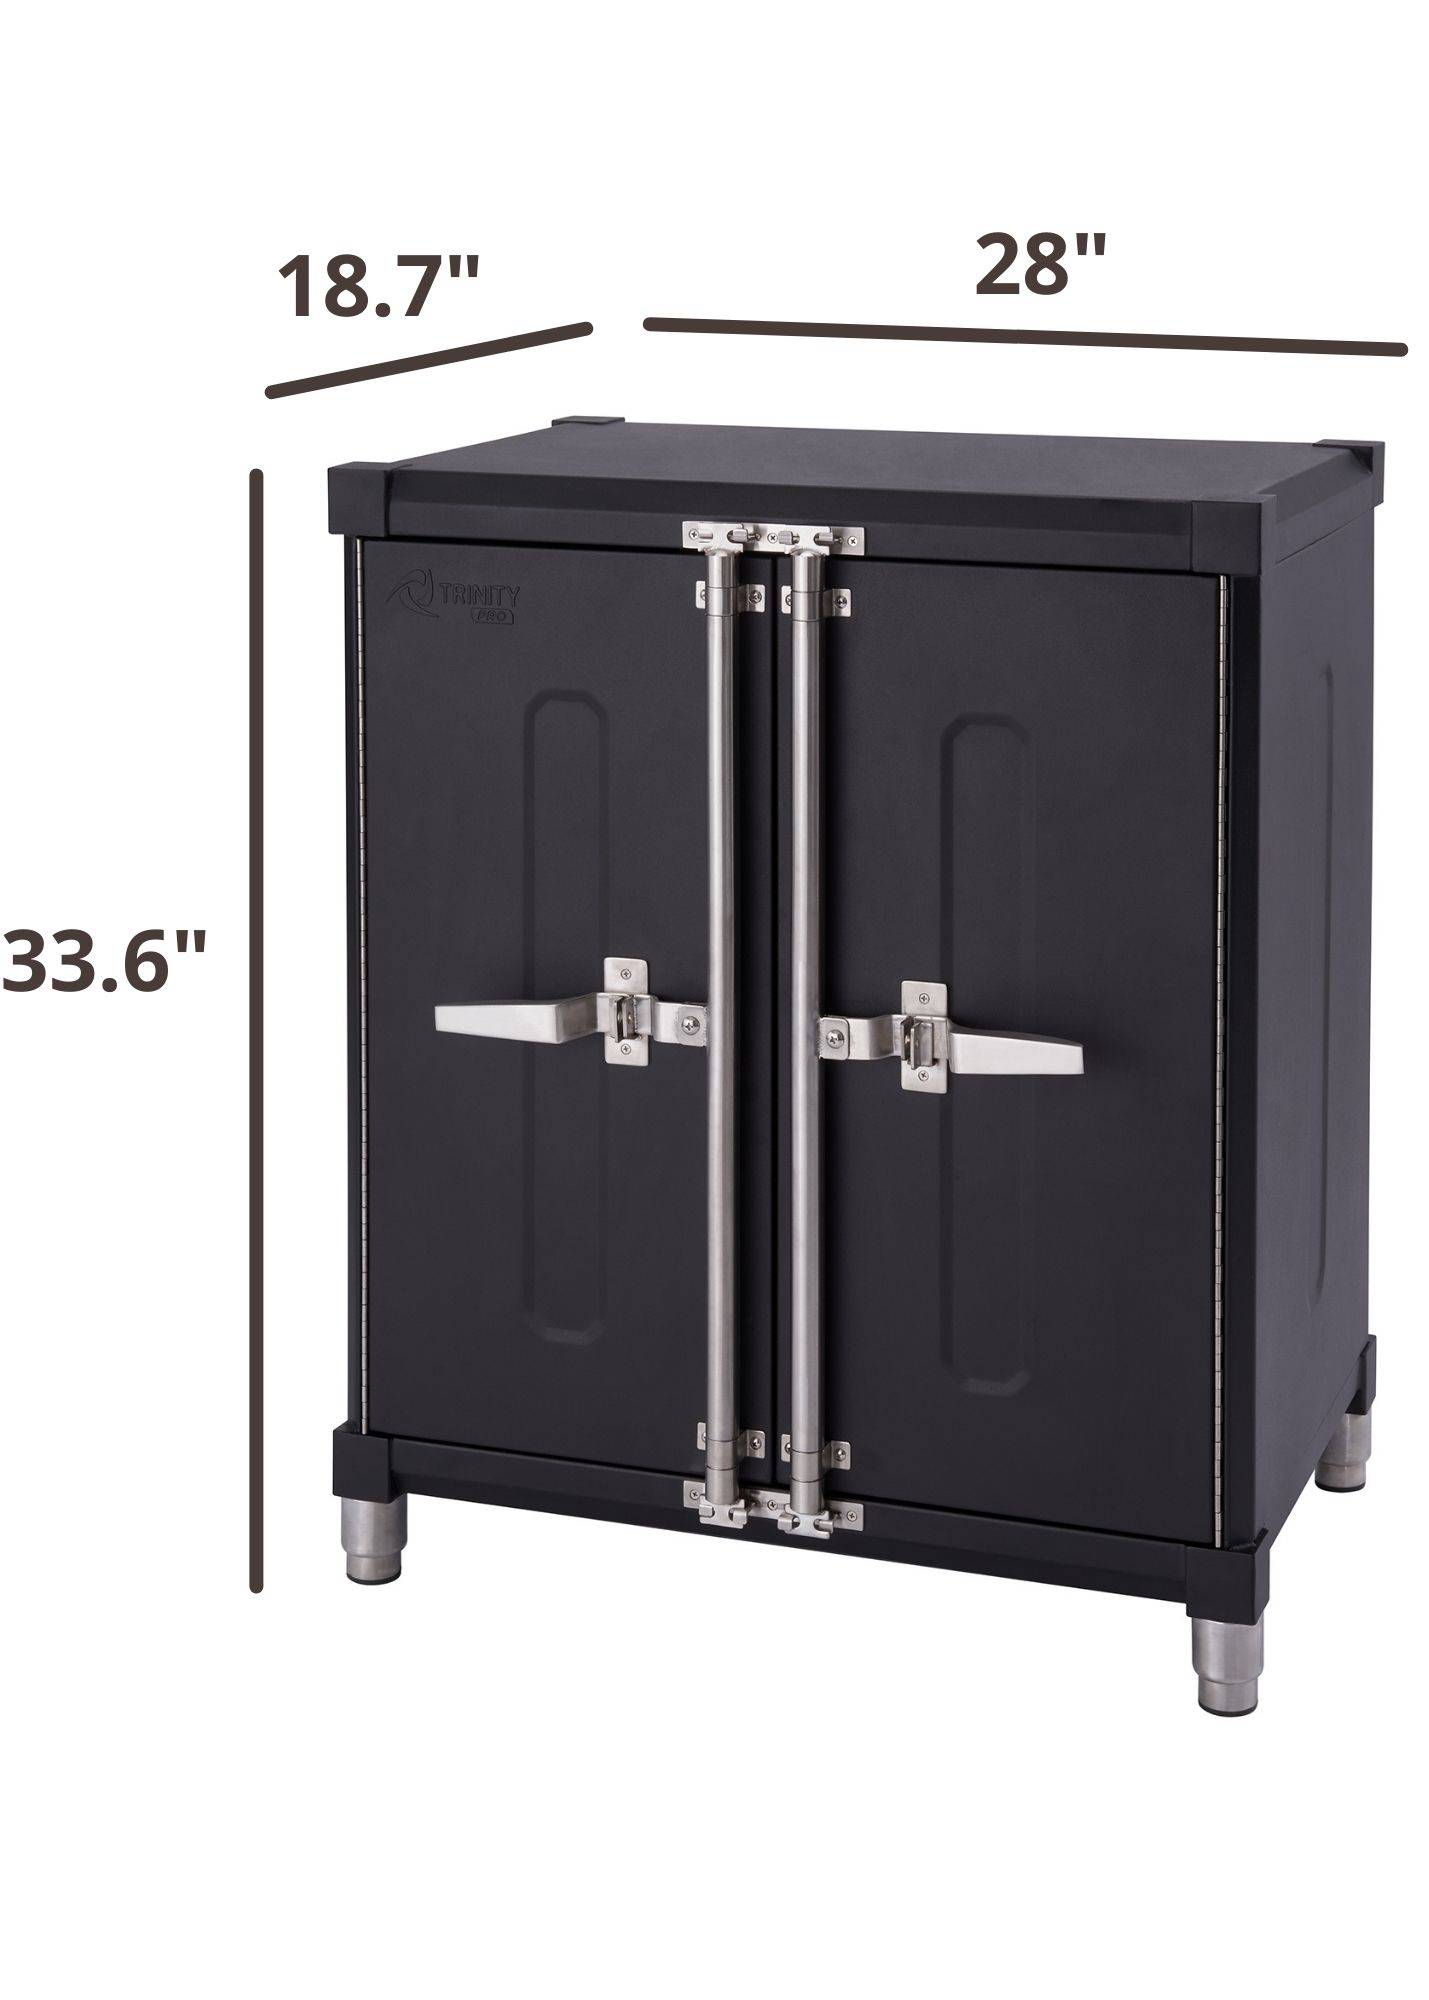 28 inches wide base cabinet